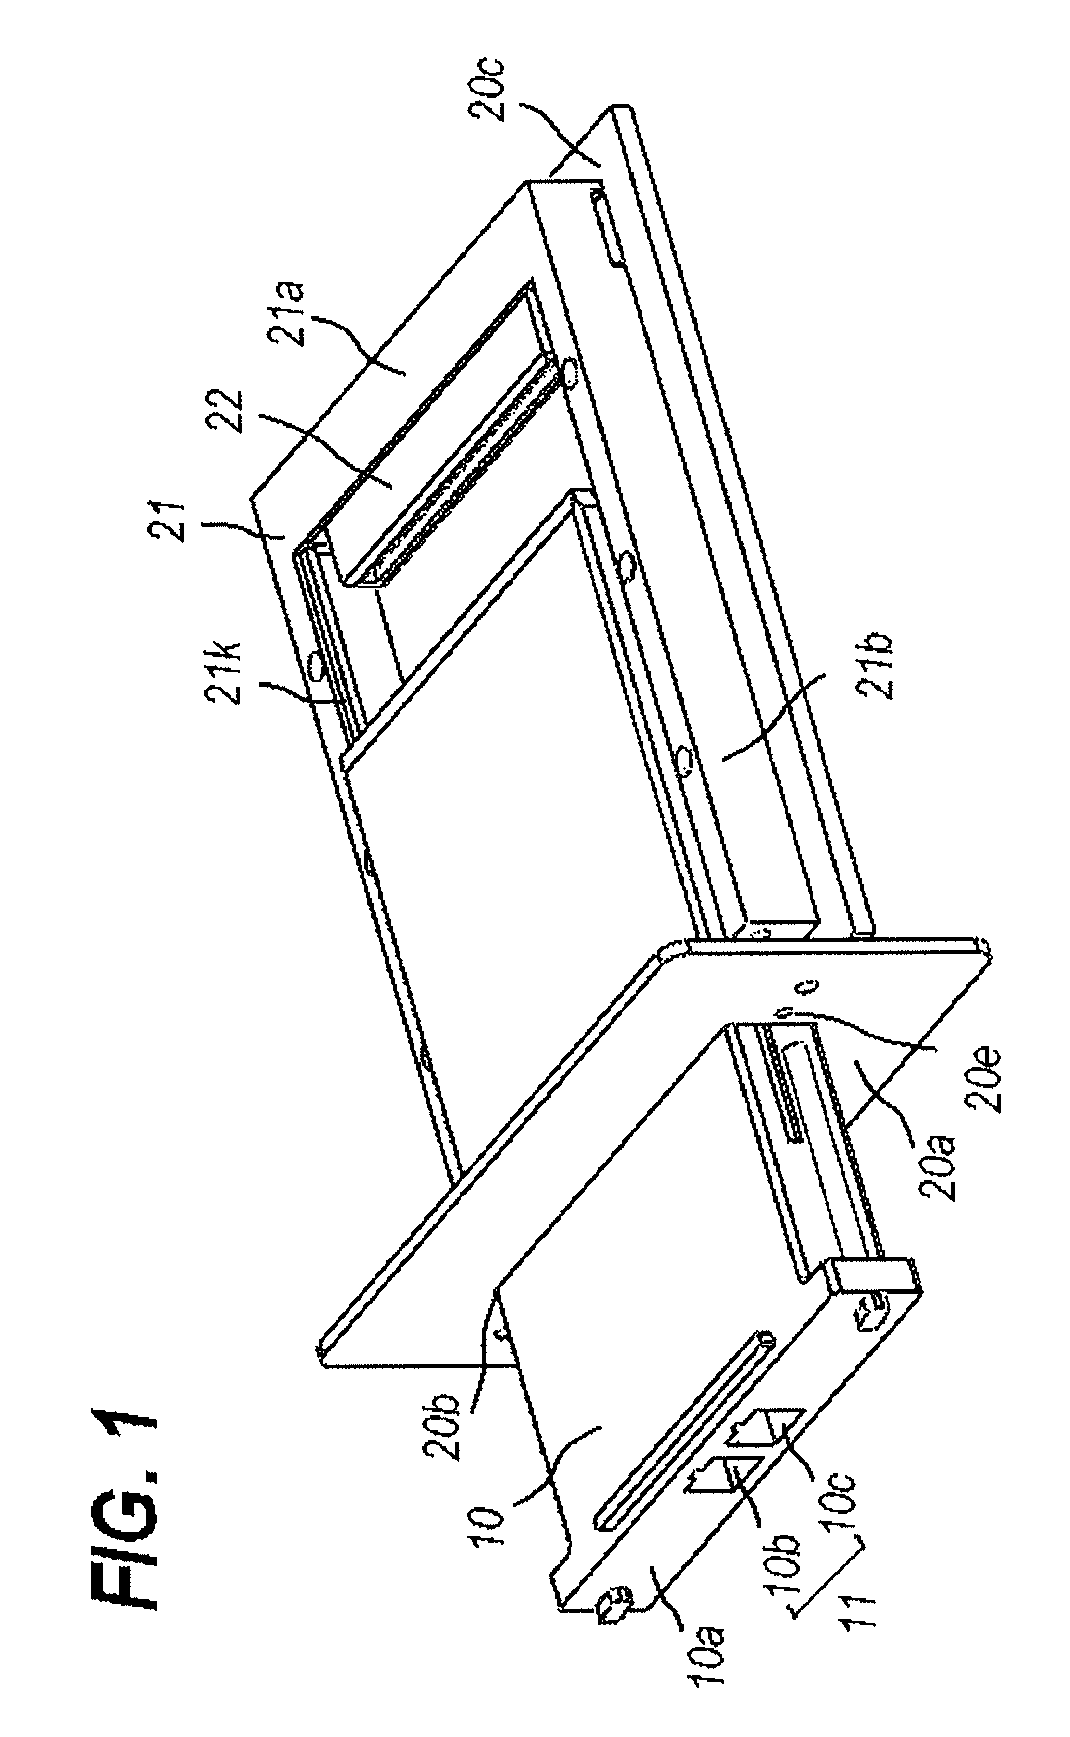 Pluggable system between optical transceiver and host system